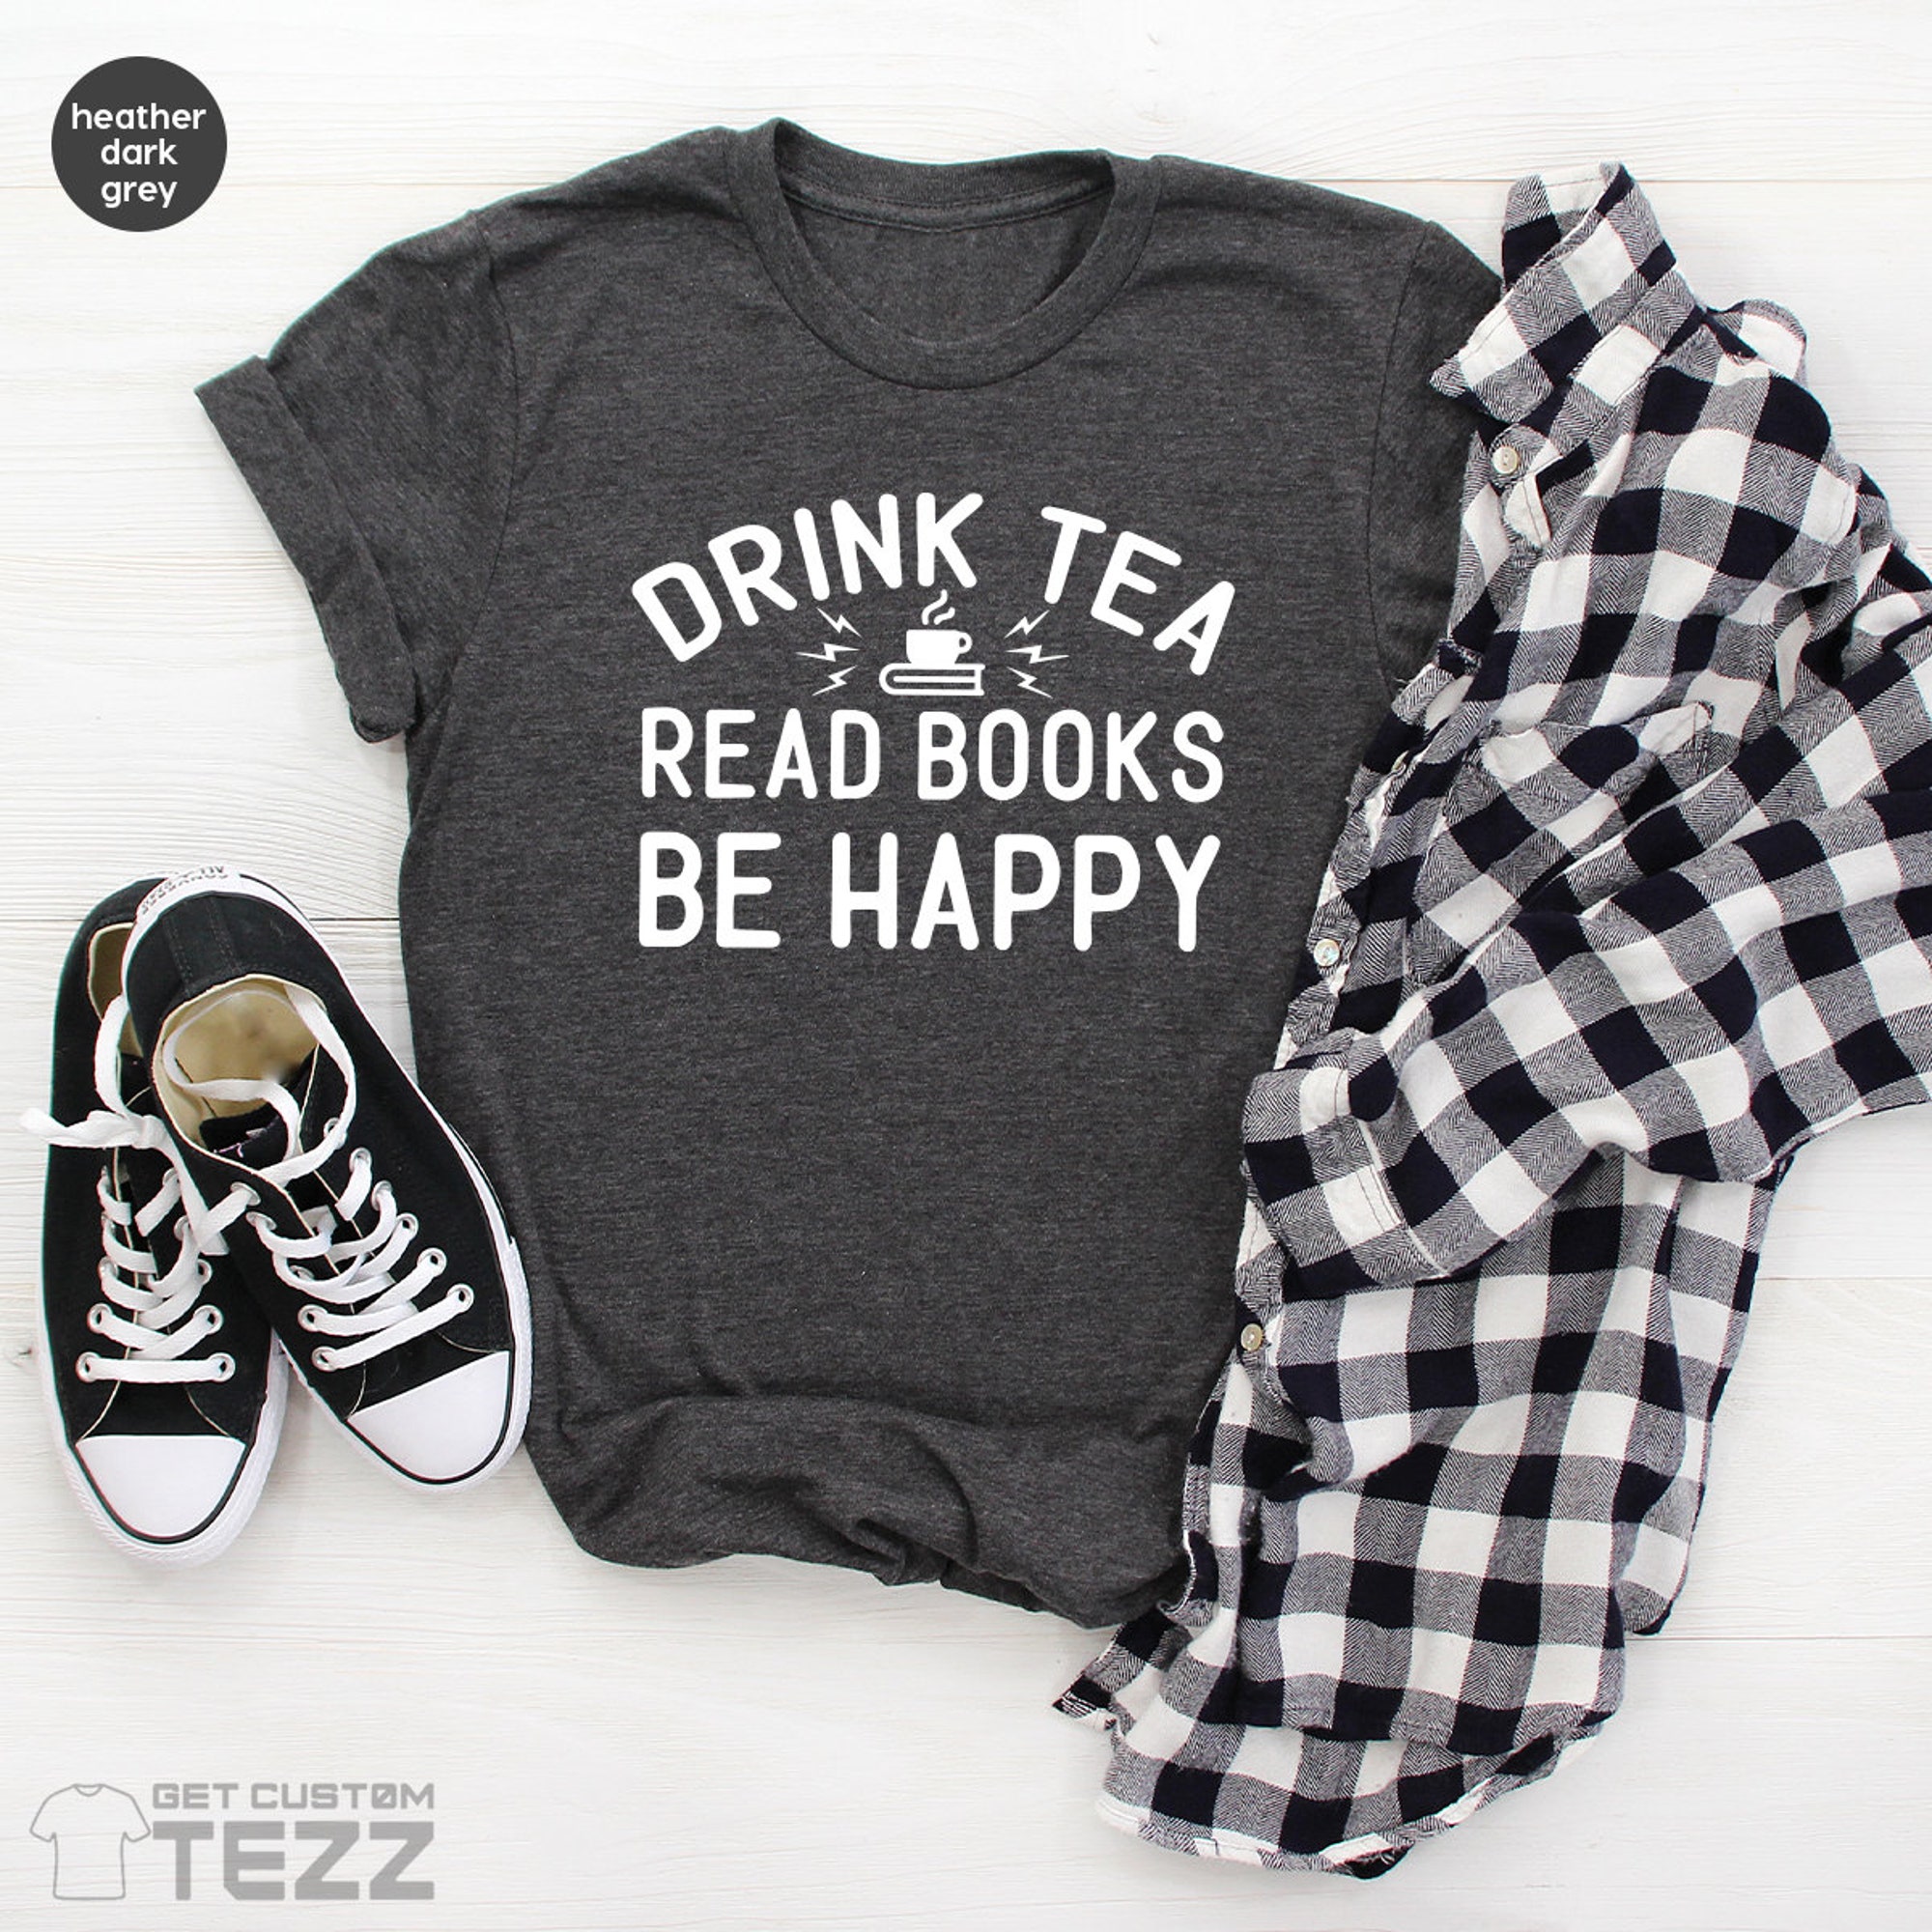 Book Lovers TShirts, Drink Tea T-Shirt, Book Reader Gifts